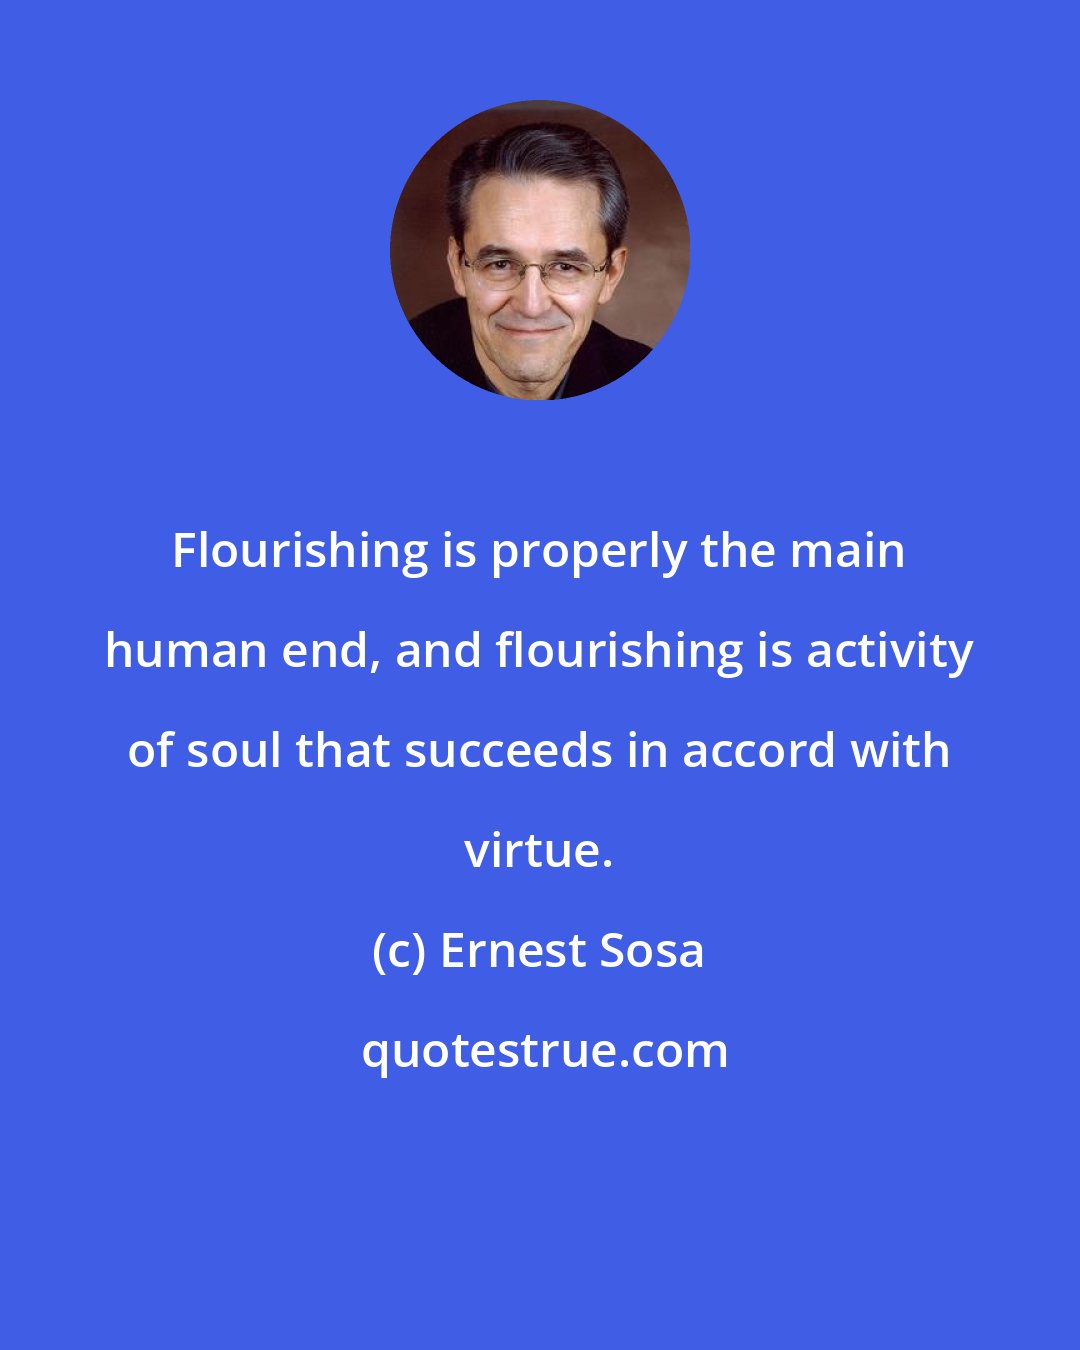 Ernest Sosa: Flourishing is properly the main human end, and flourishing is activity of soul that succeeds in accord with virtue.